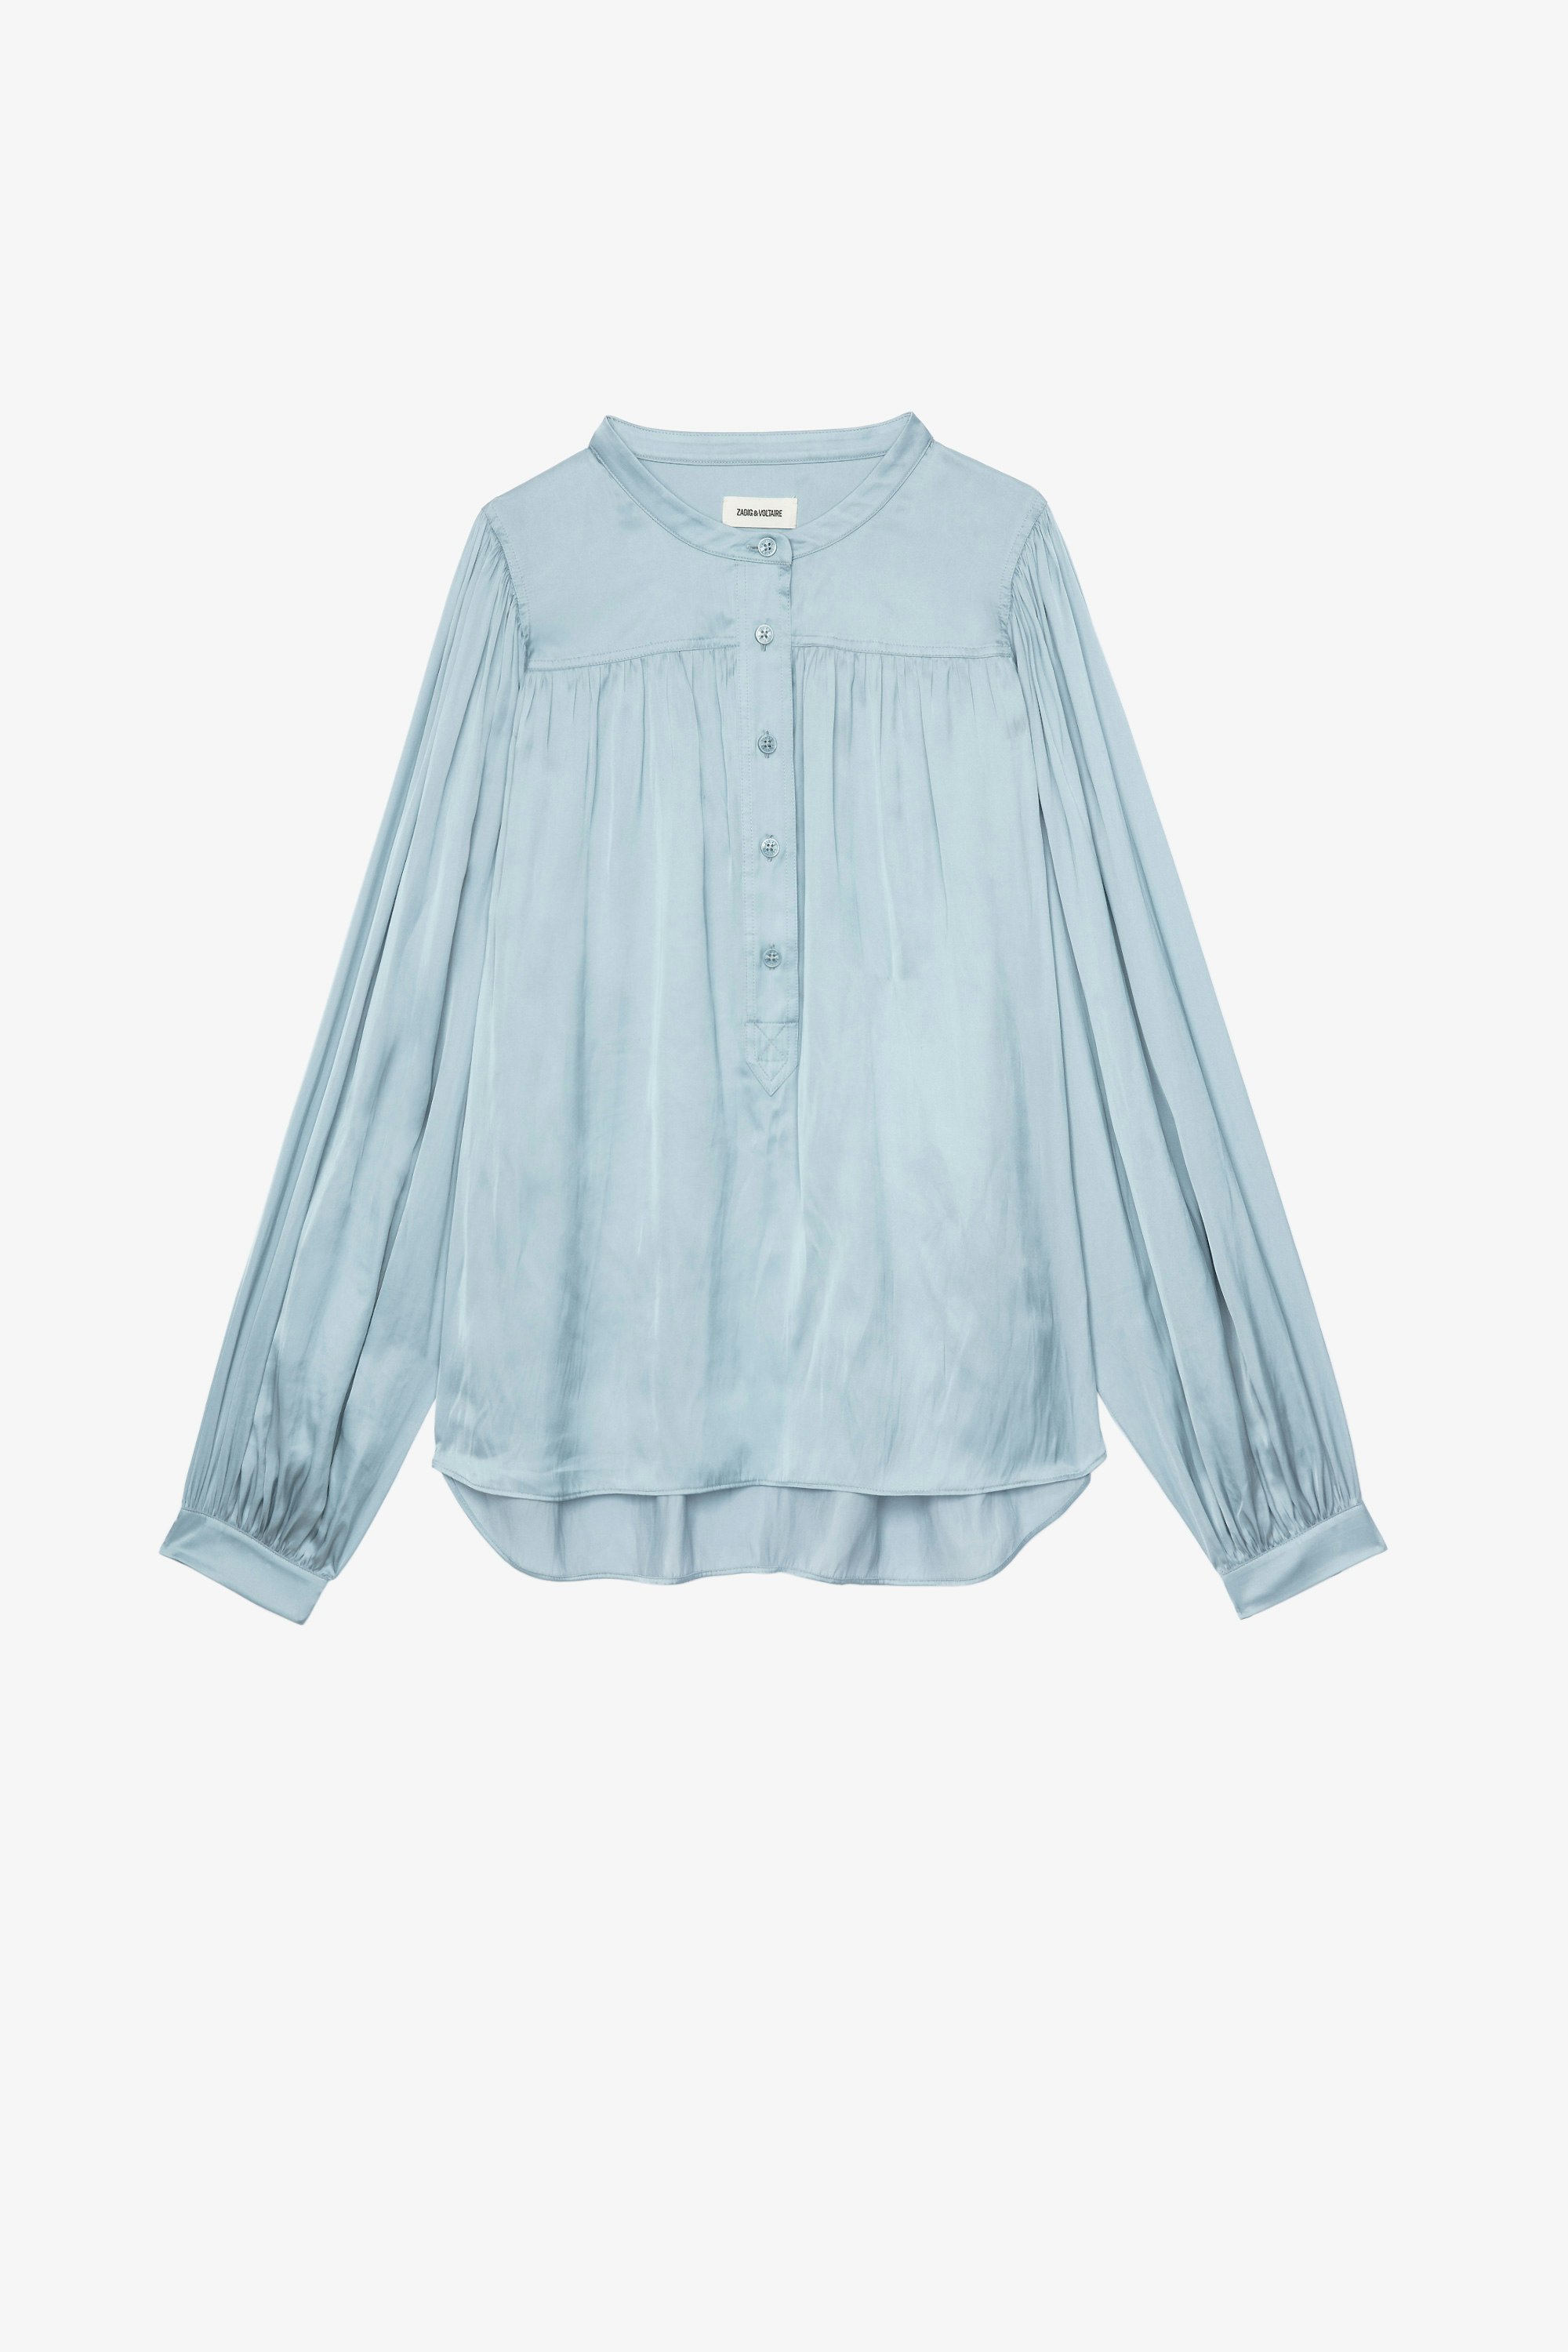 Tigy Blouse   Sky blue satiny blouse with long puff sleeves 